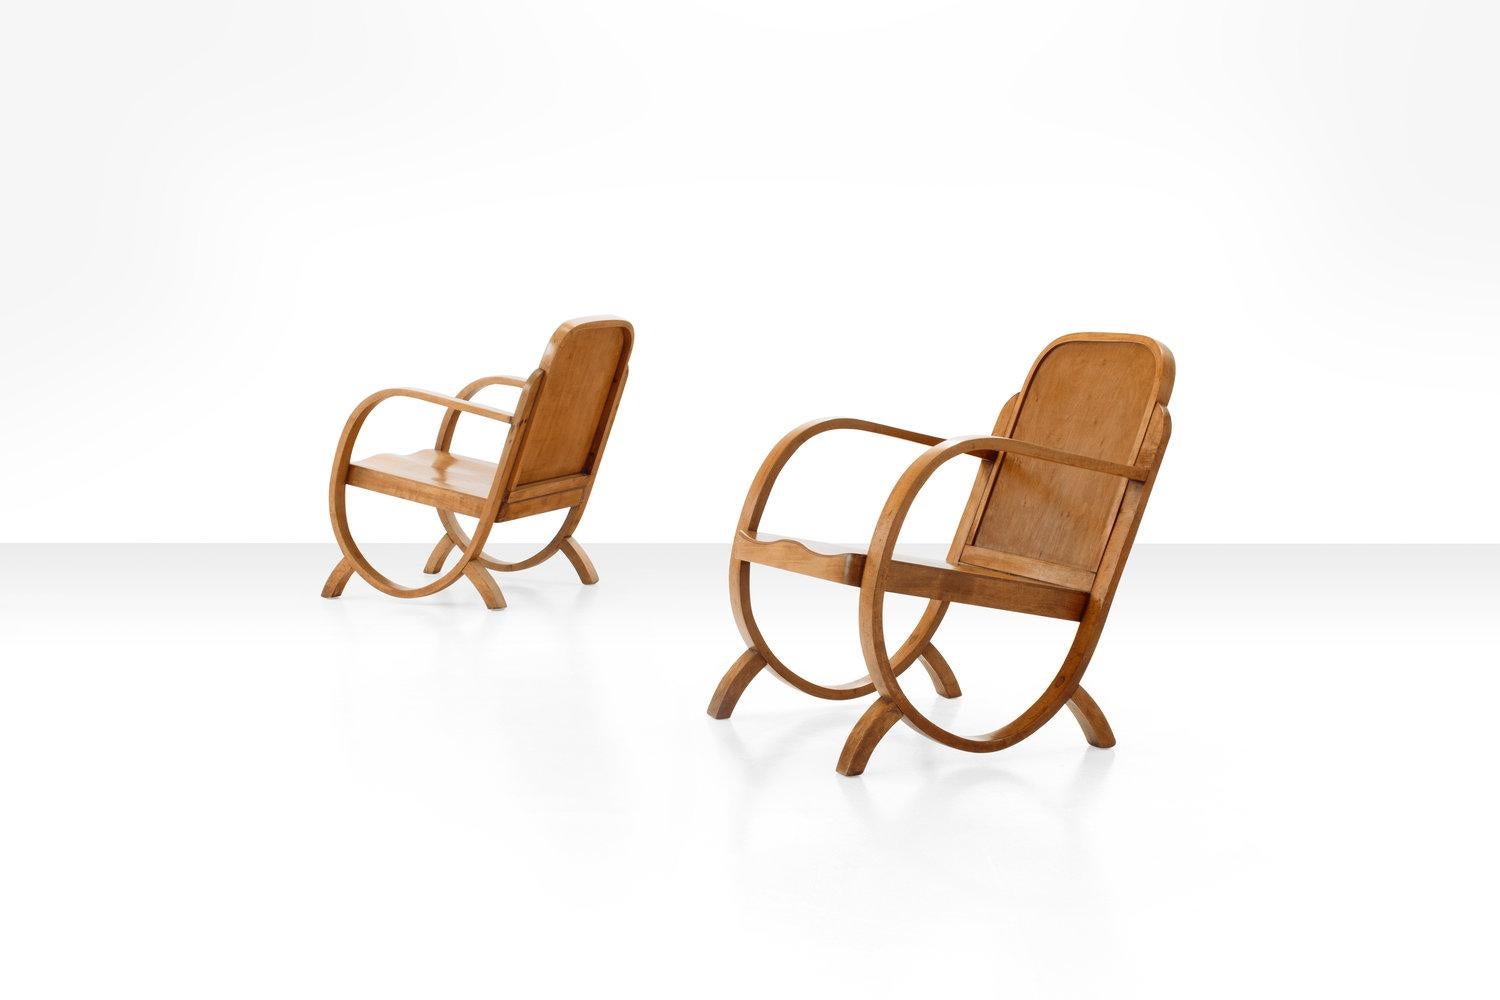 Pair of Gerdau armchairs in caviuna wood from Brazil, 1930s.

This pair of armchairs is playful and modest, but with strong geometric lines in Art Deco style. The bentwood armrest go full circle, down to the legs and up to support the backrest,